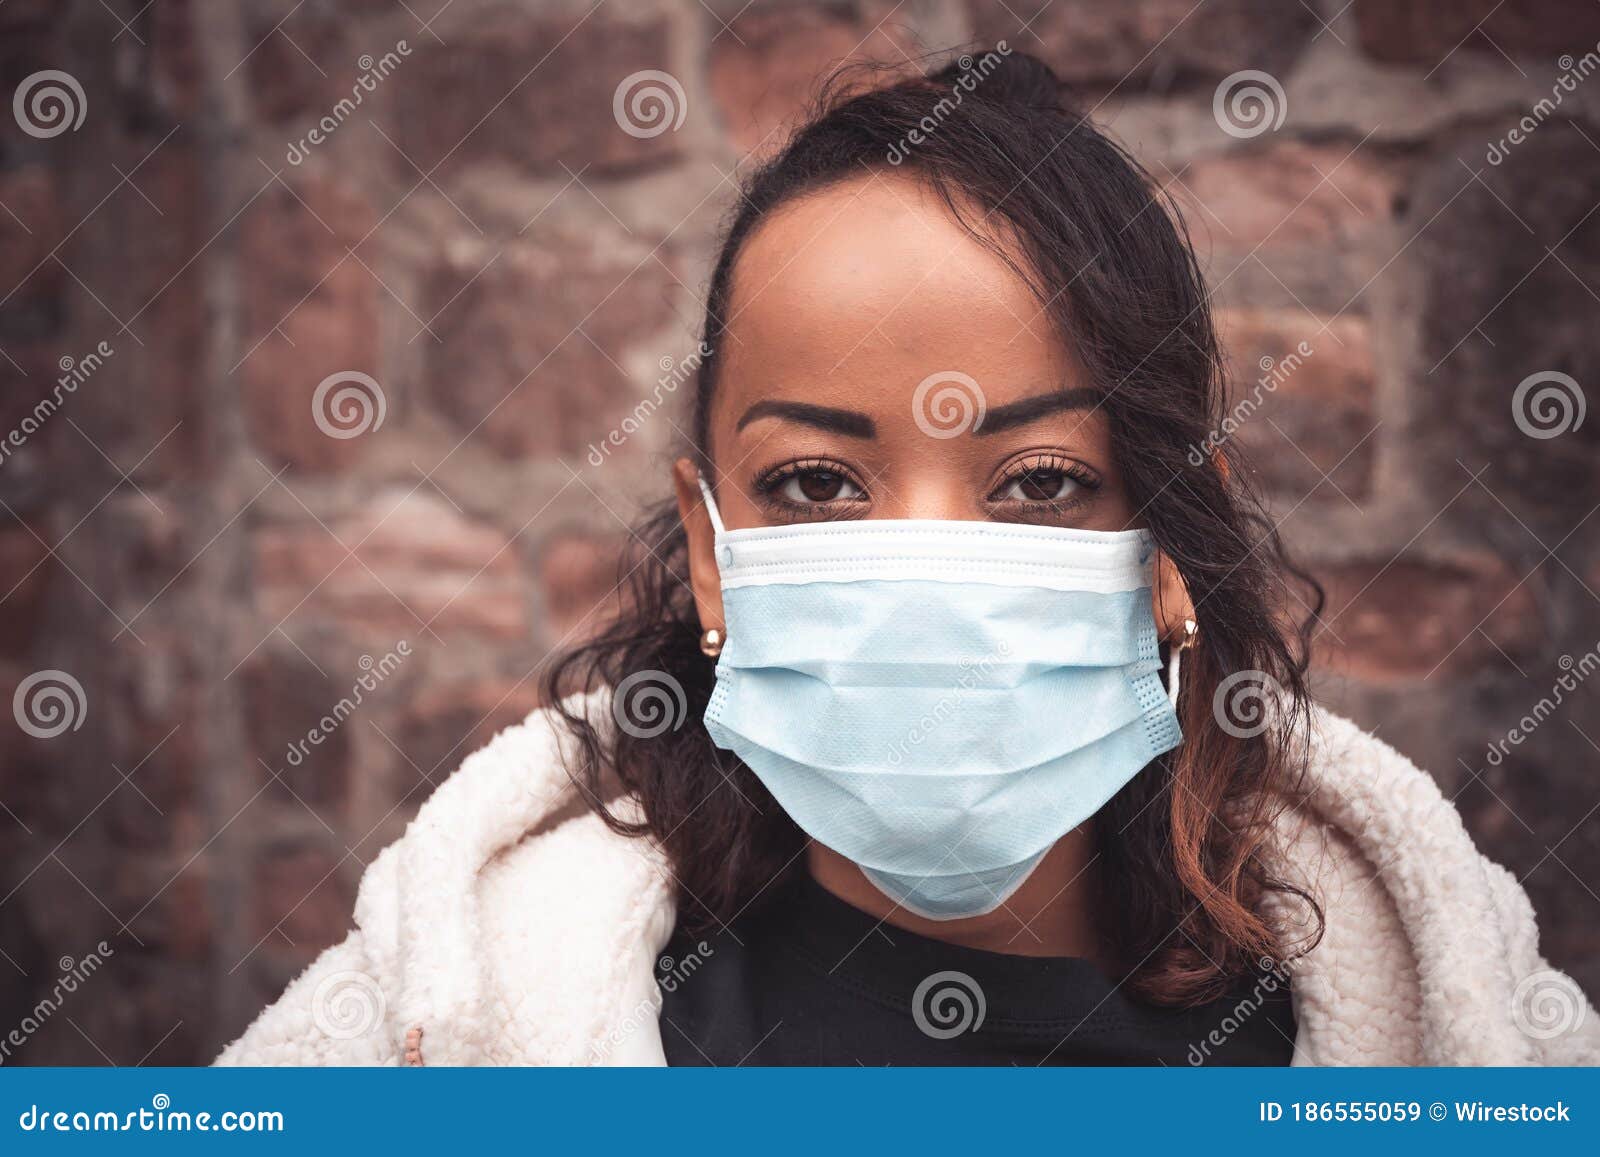 Beautiful Black Girl Outdoor with a Medical Mask Stock Image - Image of ...